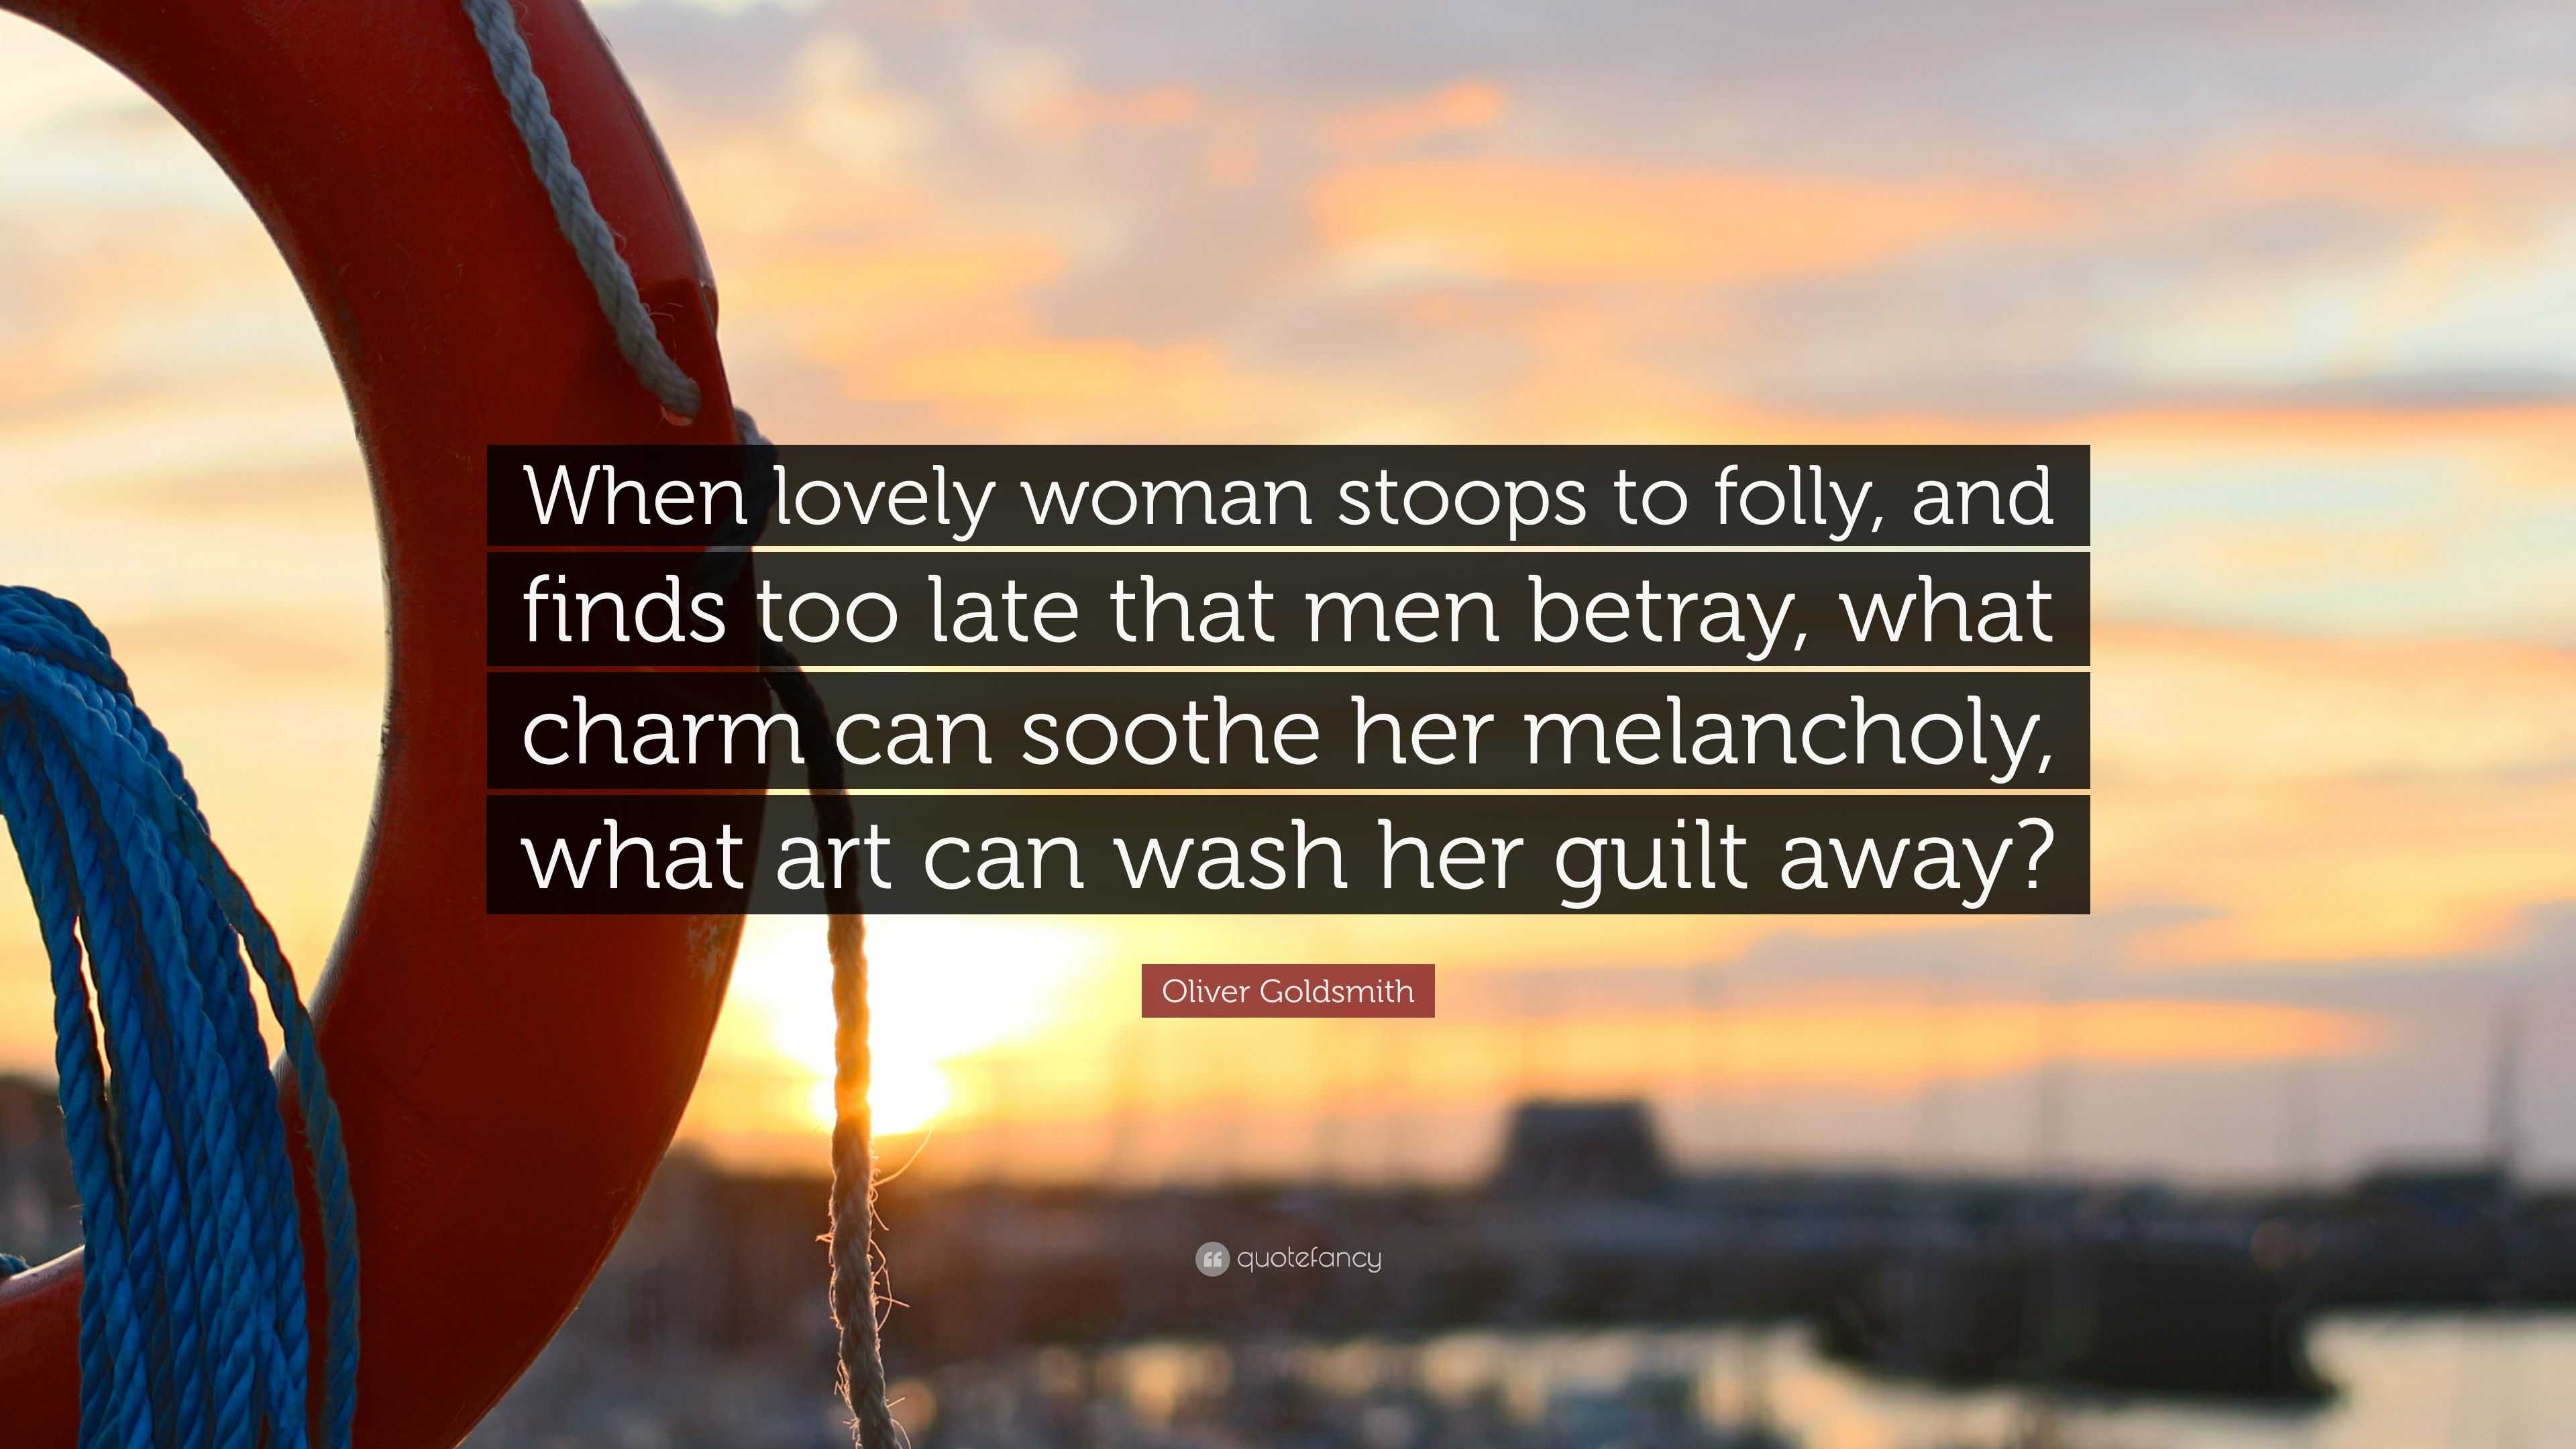 Oliver Goldsmith Quote: “When lovely woman stoops to folly, and finds ...